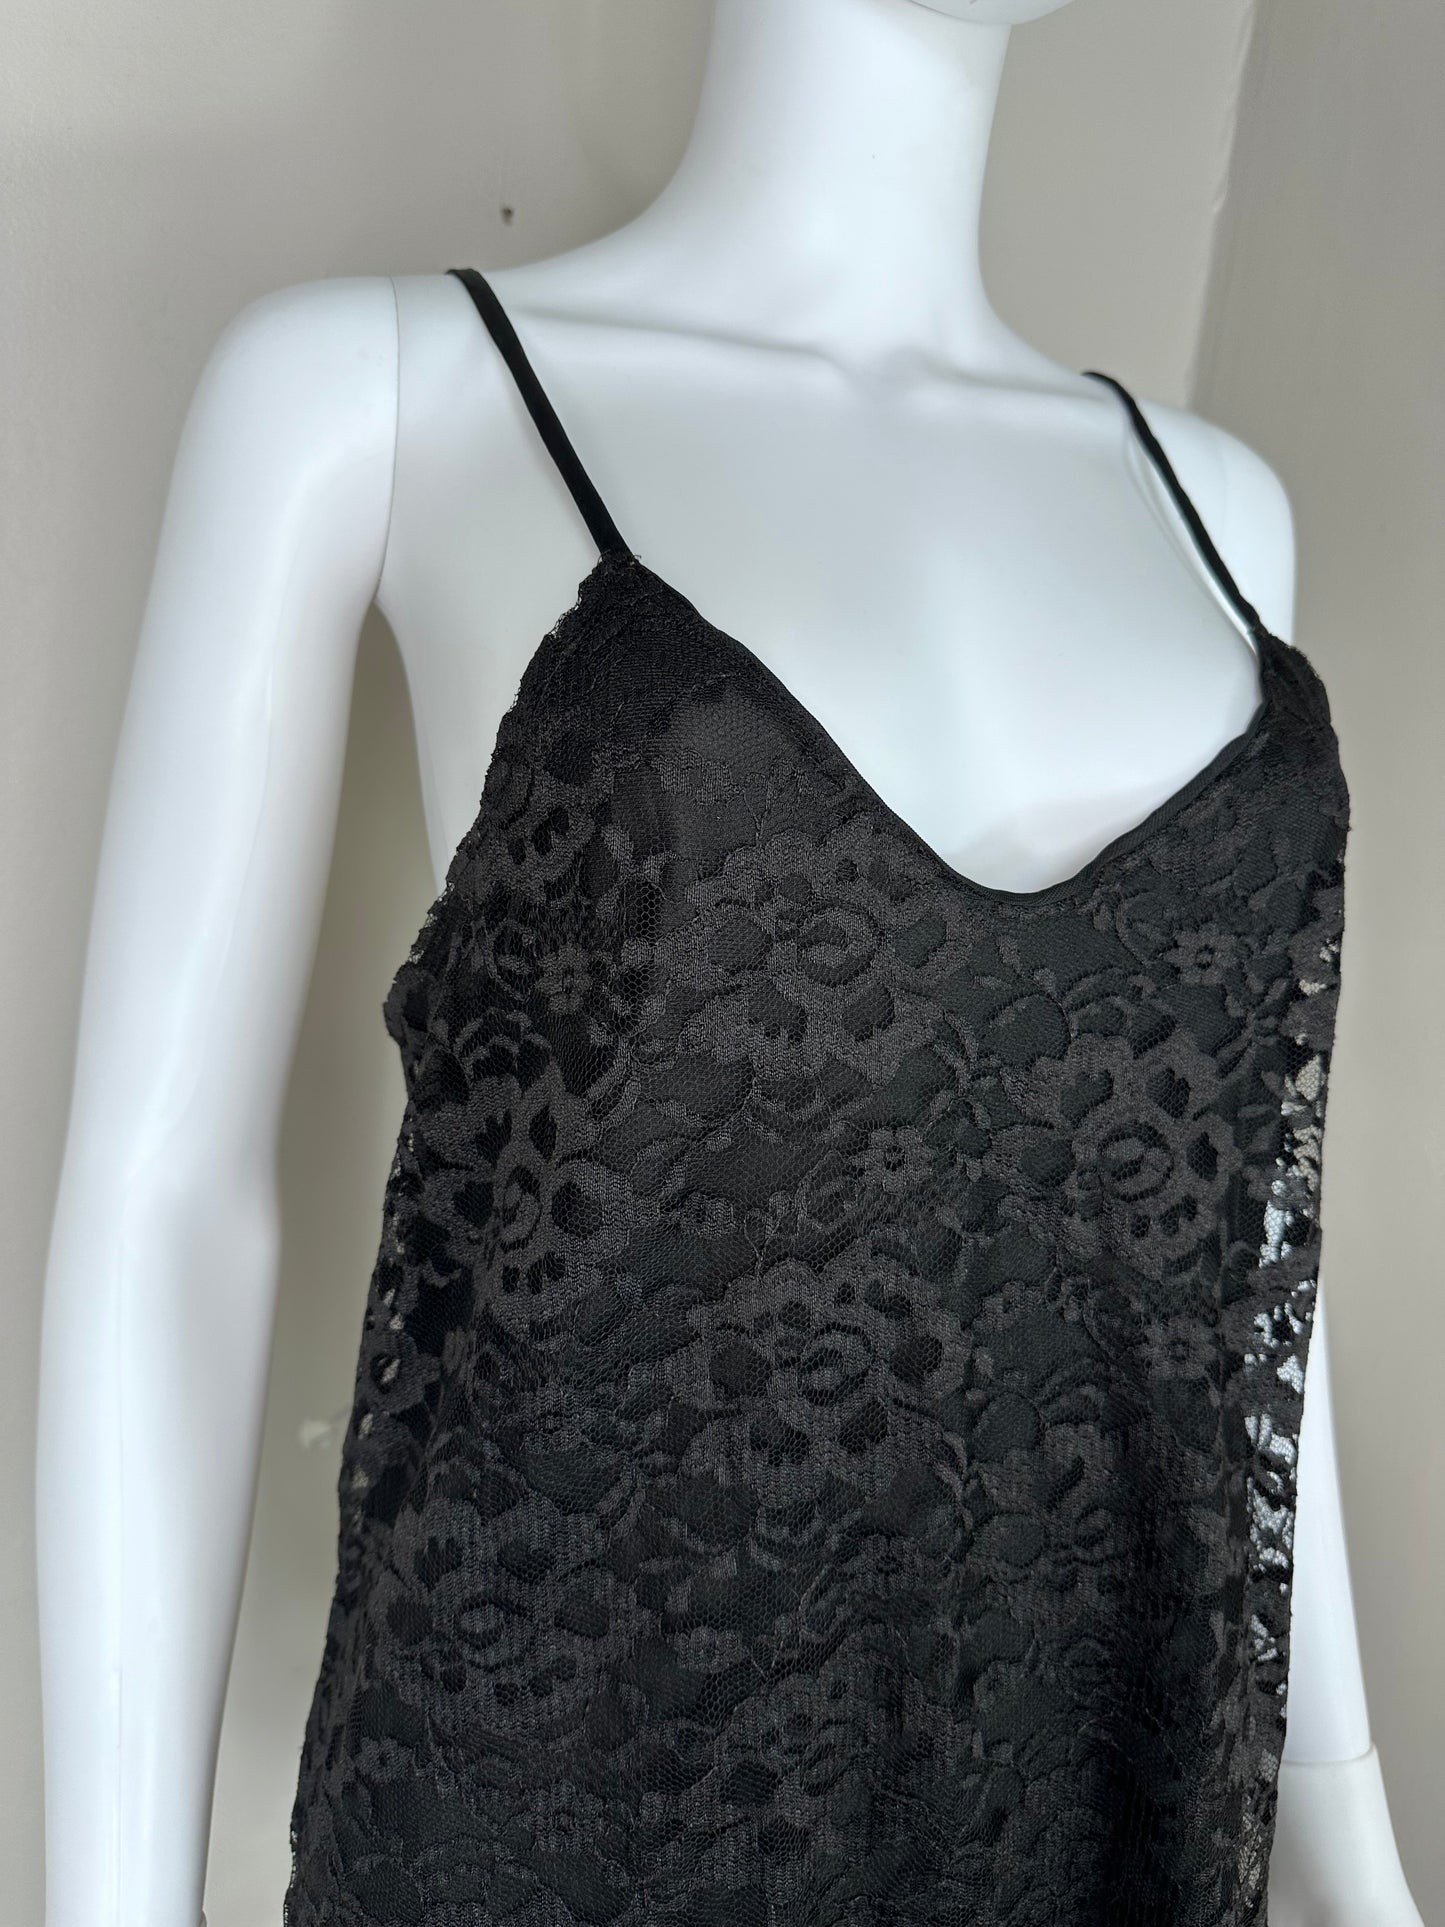 1990s Black Lace Nightgown, The Woman Within Fifth Avenue Lingerie Size Small